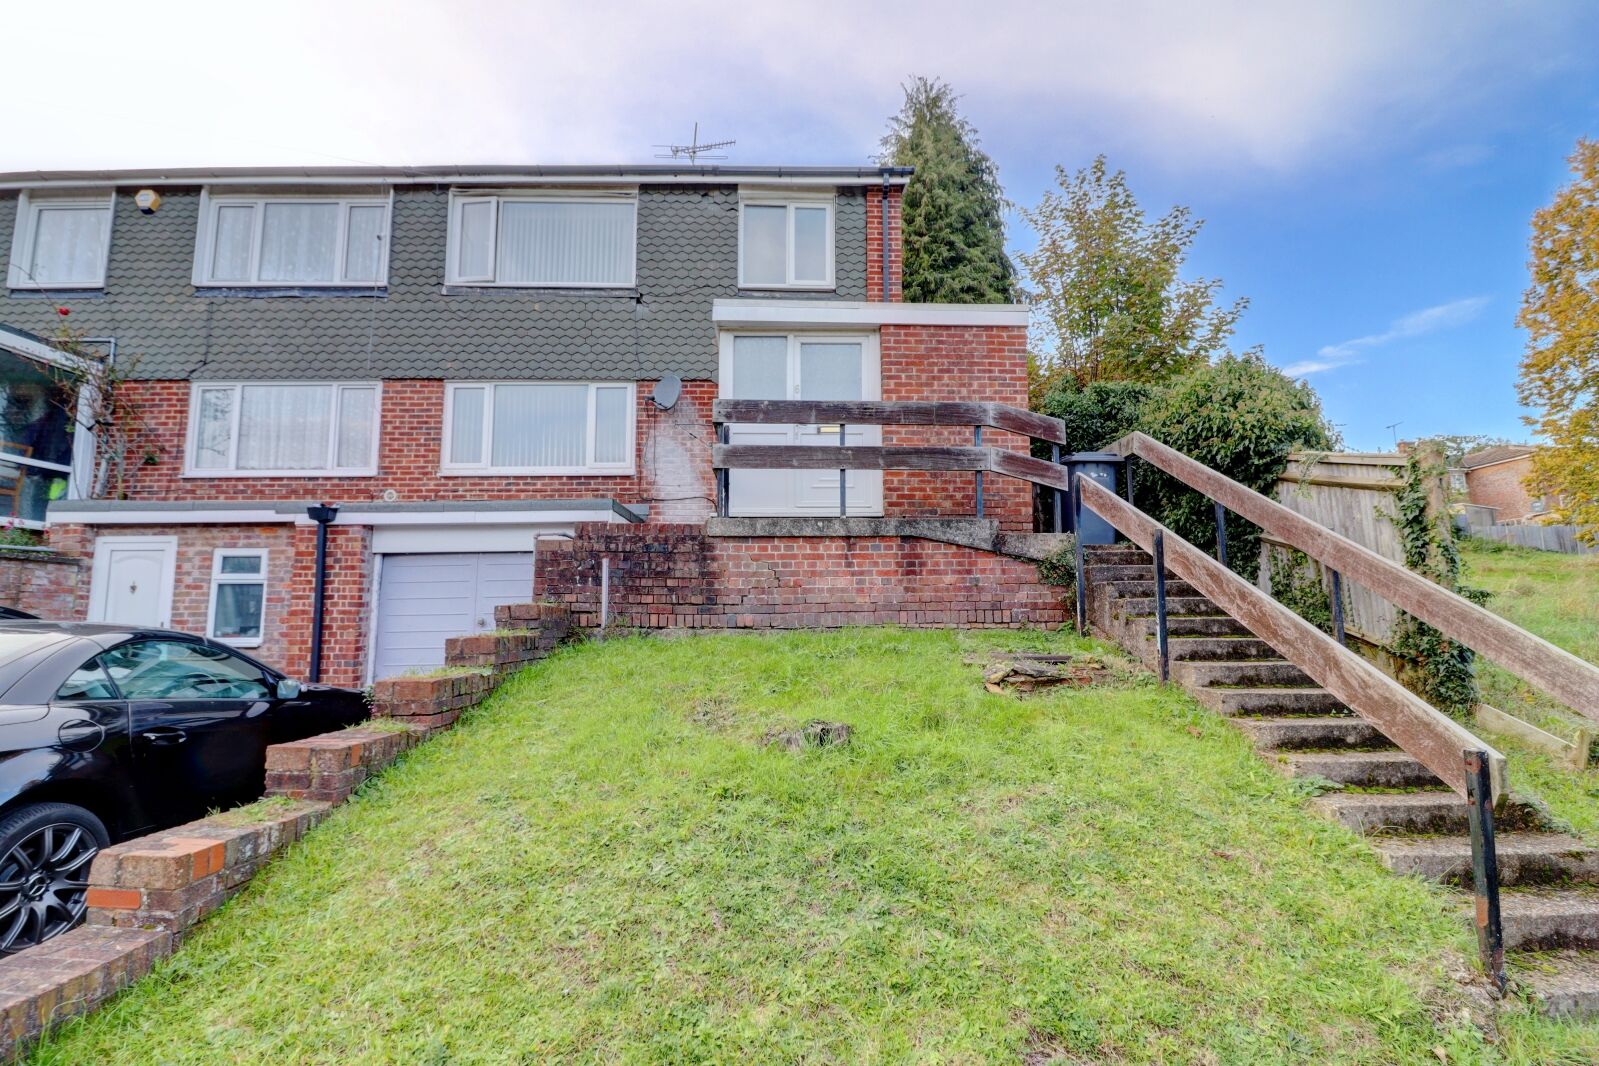 3 bedroom semi detached house for sale Pettifer Way, High Wycombe, HP12, main image